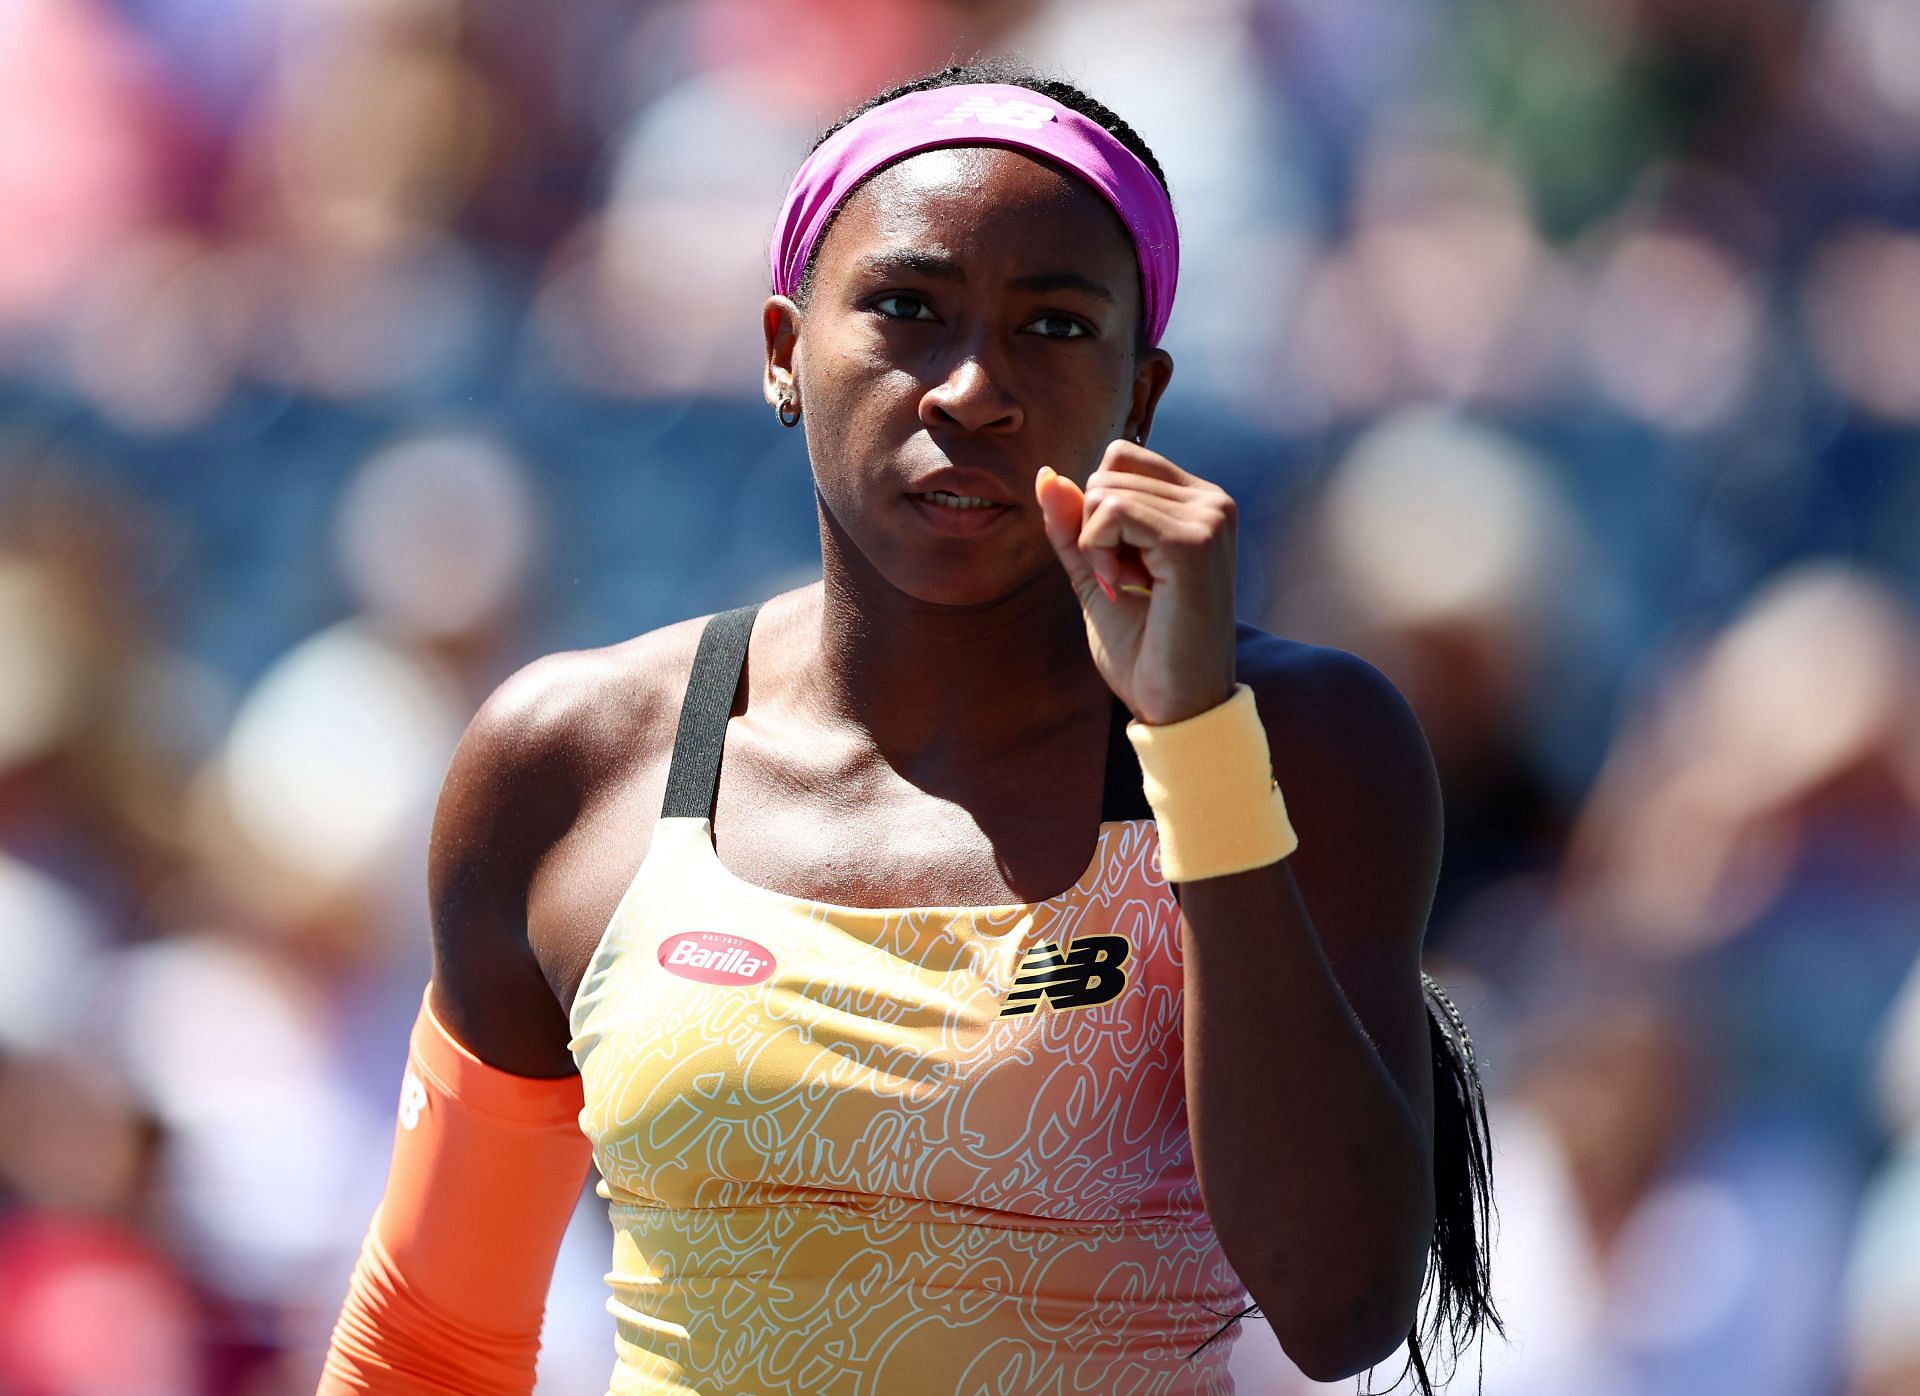 Coco Gauff provides an update after suffering from an injury at Cincinnati Open